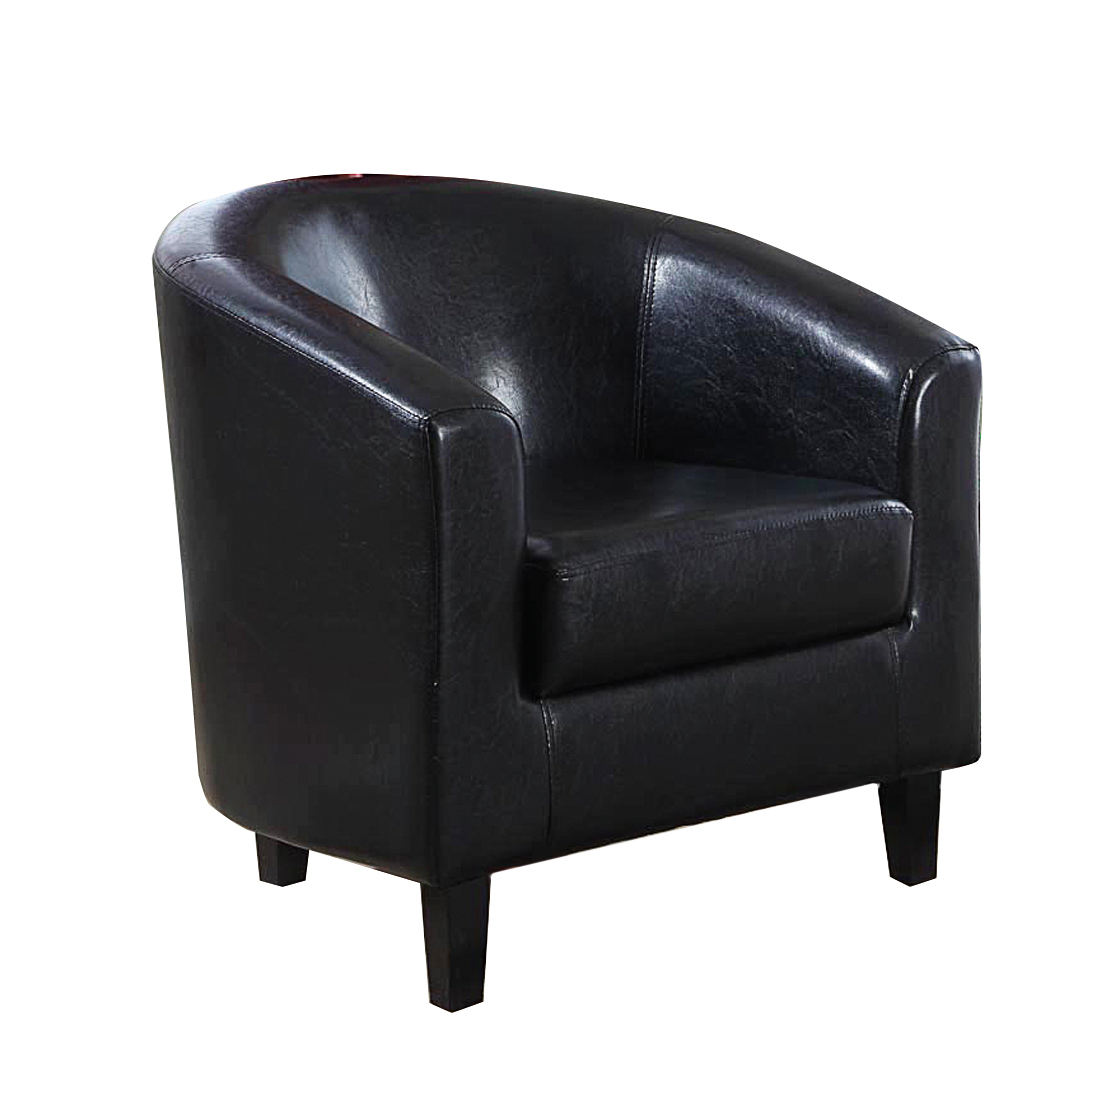 Tanly Chair Black